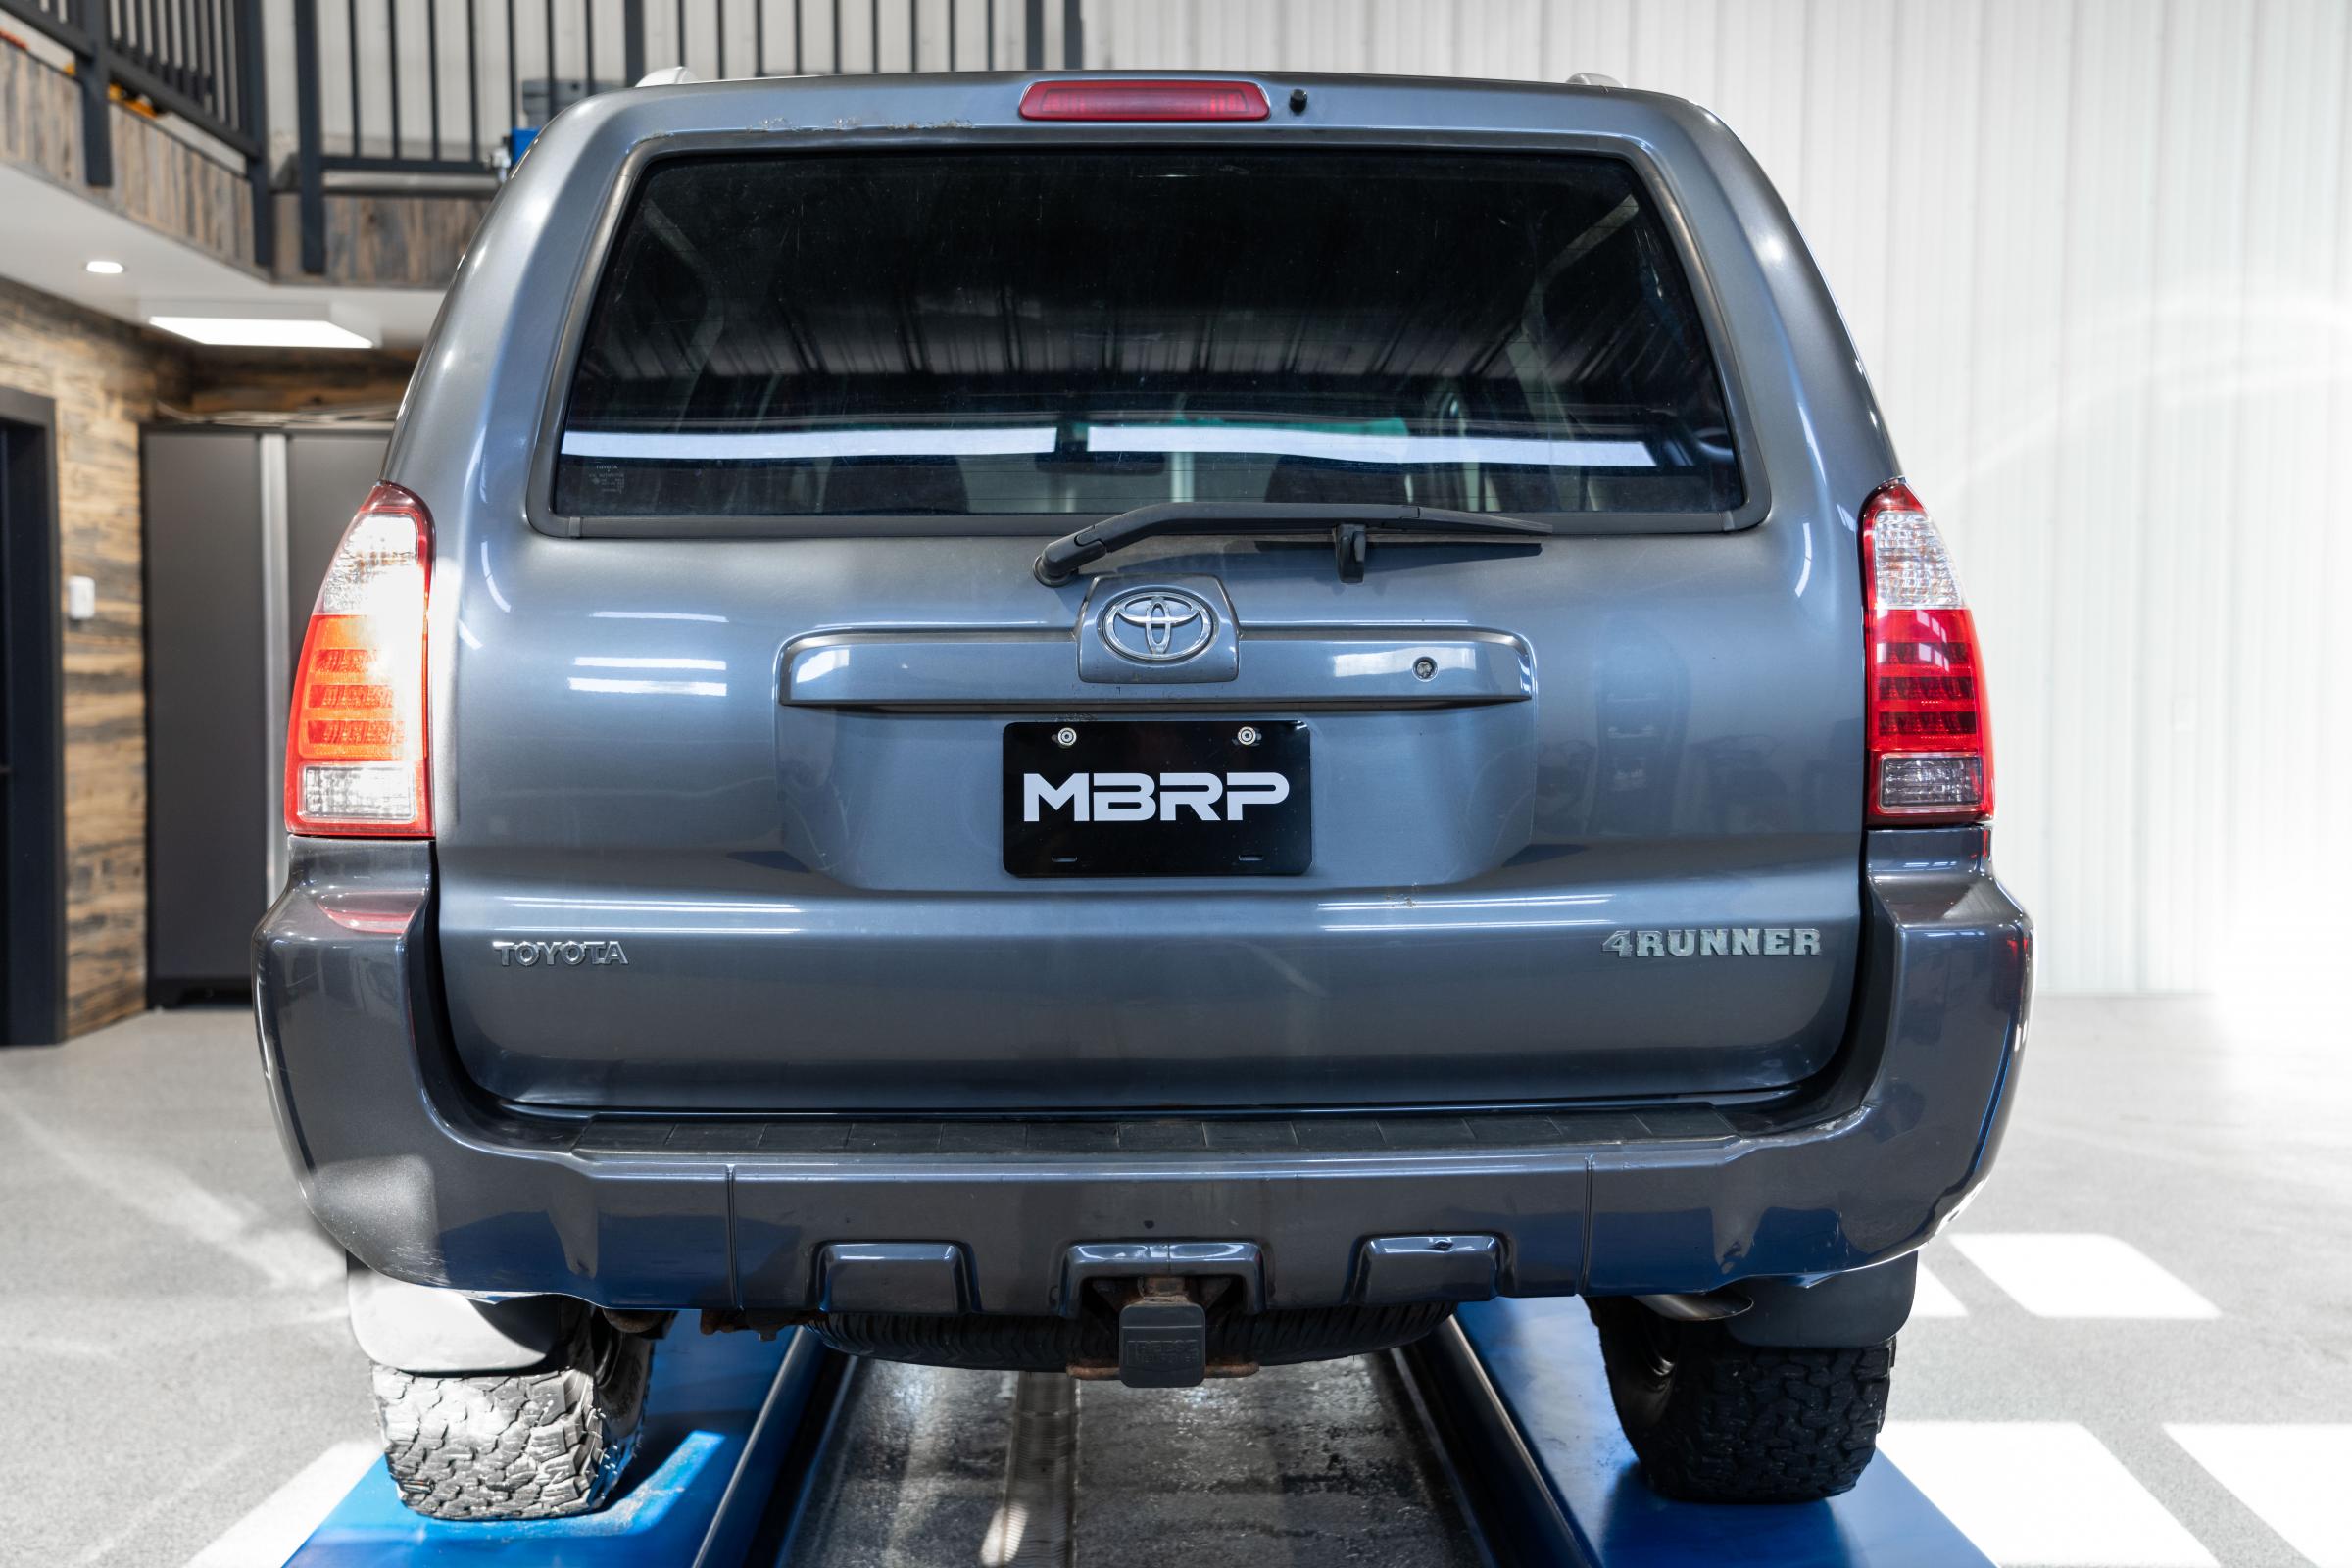 MBRP Exhaust 04-23 Toyota 4Runner 11-16 Toyota Land Cruiser Prado Armor Pro T304 Stainless Steel 2.5 Inch Cat-Back High Clearance Turn Down Single Rear Exit MBRP Exhaust System S5343304